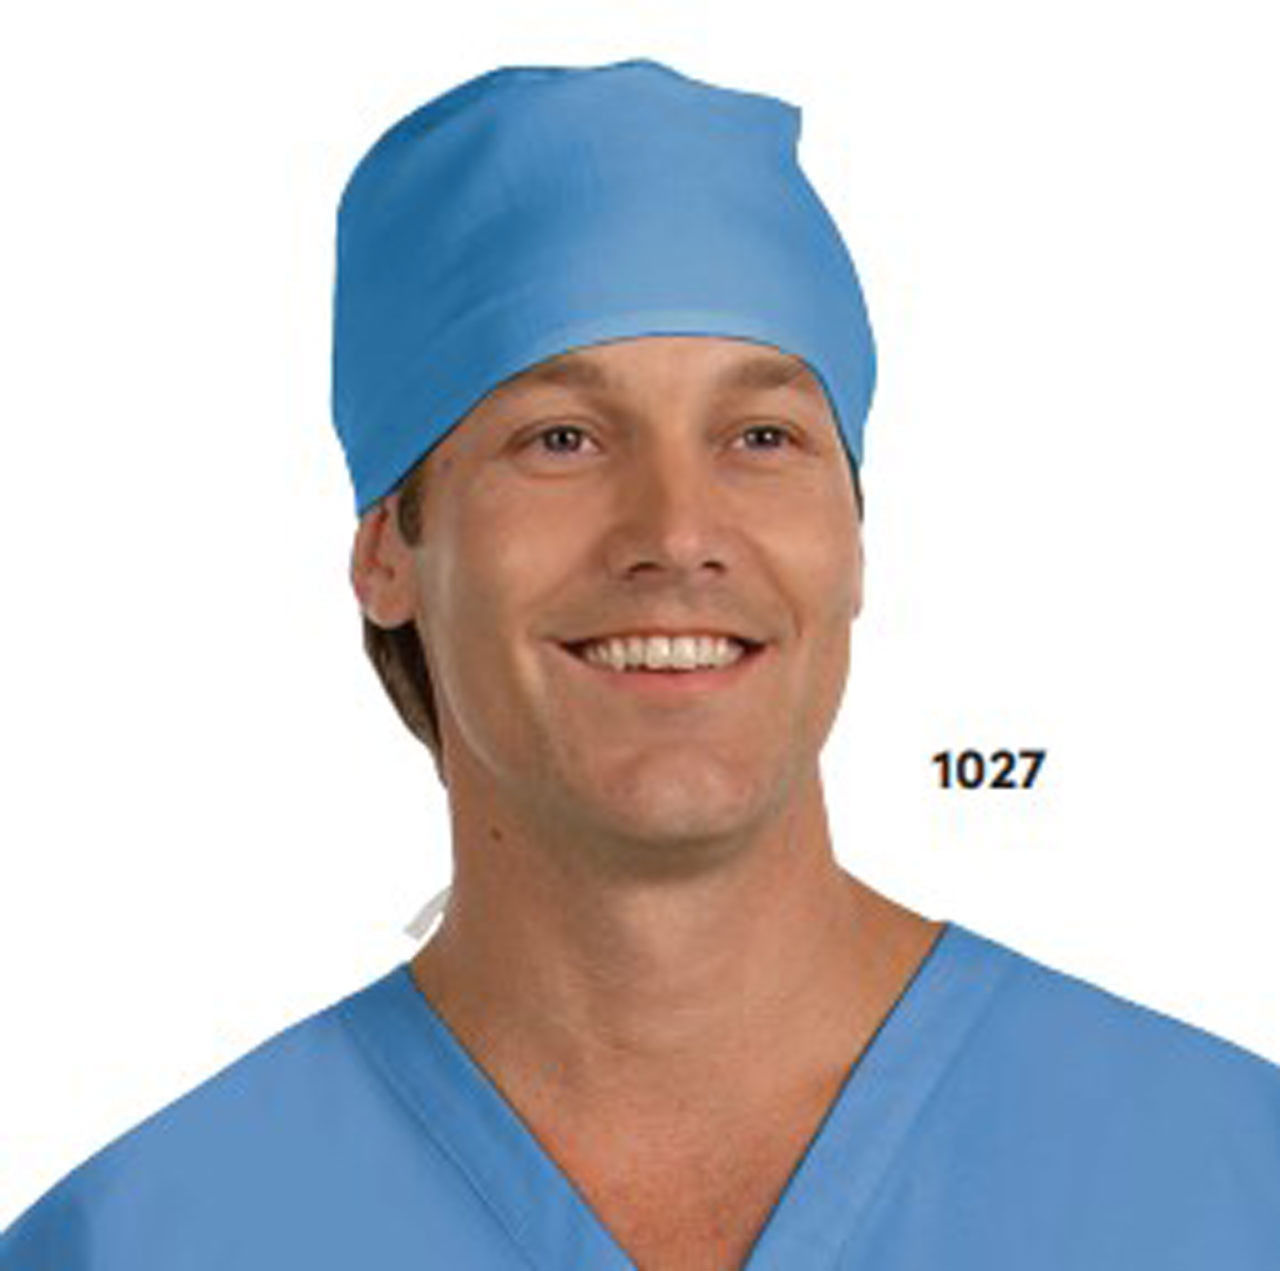 Are these bulk scrub caps sold individually or in sets?